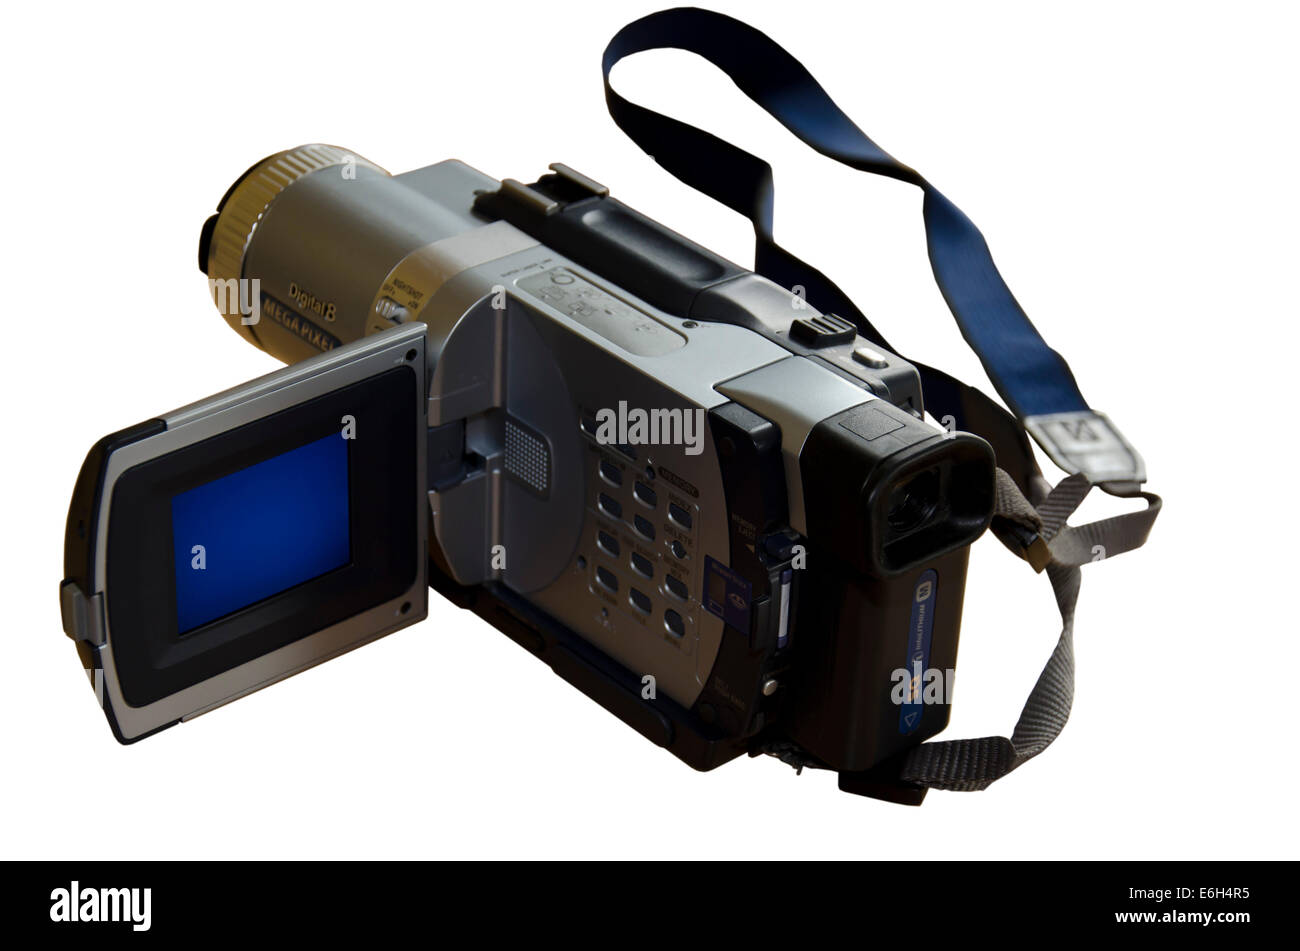 Sony "Digital Handycam" camcorder that recorded on miniature Hi8 video tapes  in the early 2000s. Model number: DCR-TRV725E Stock Photo - Alamy